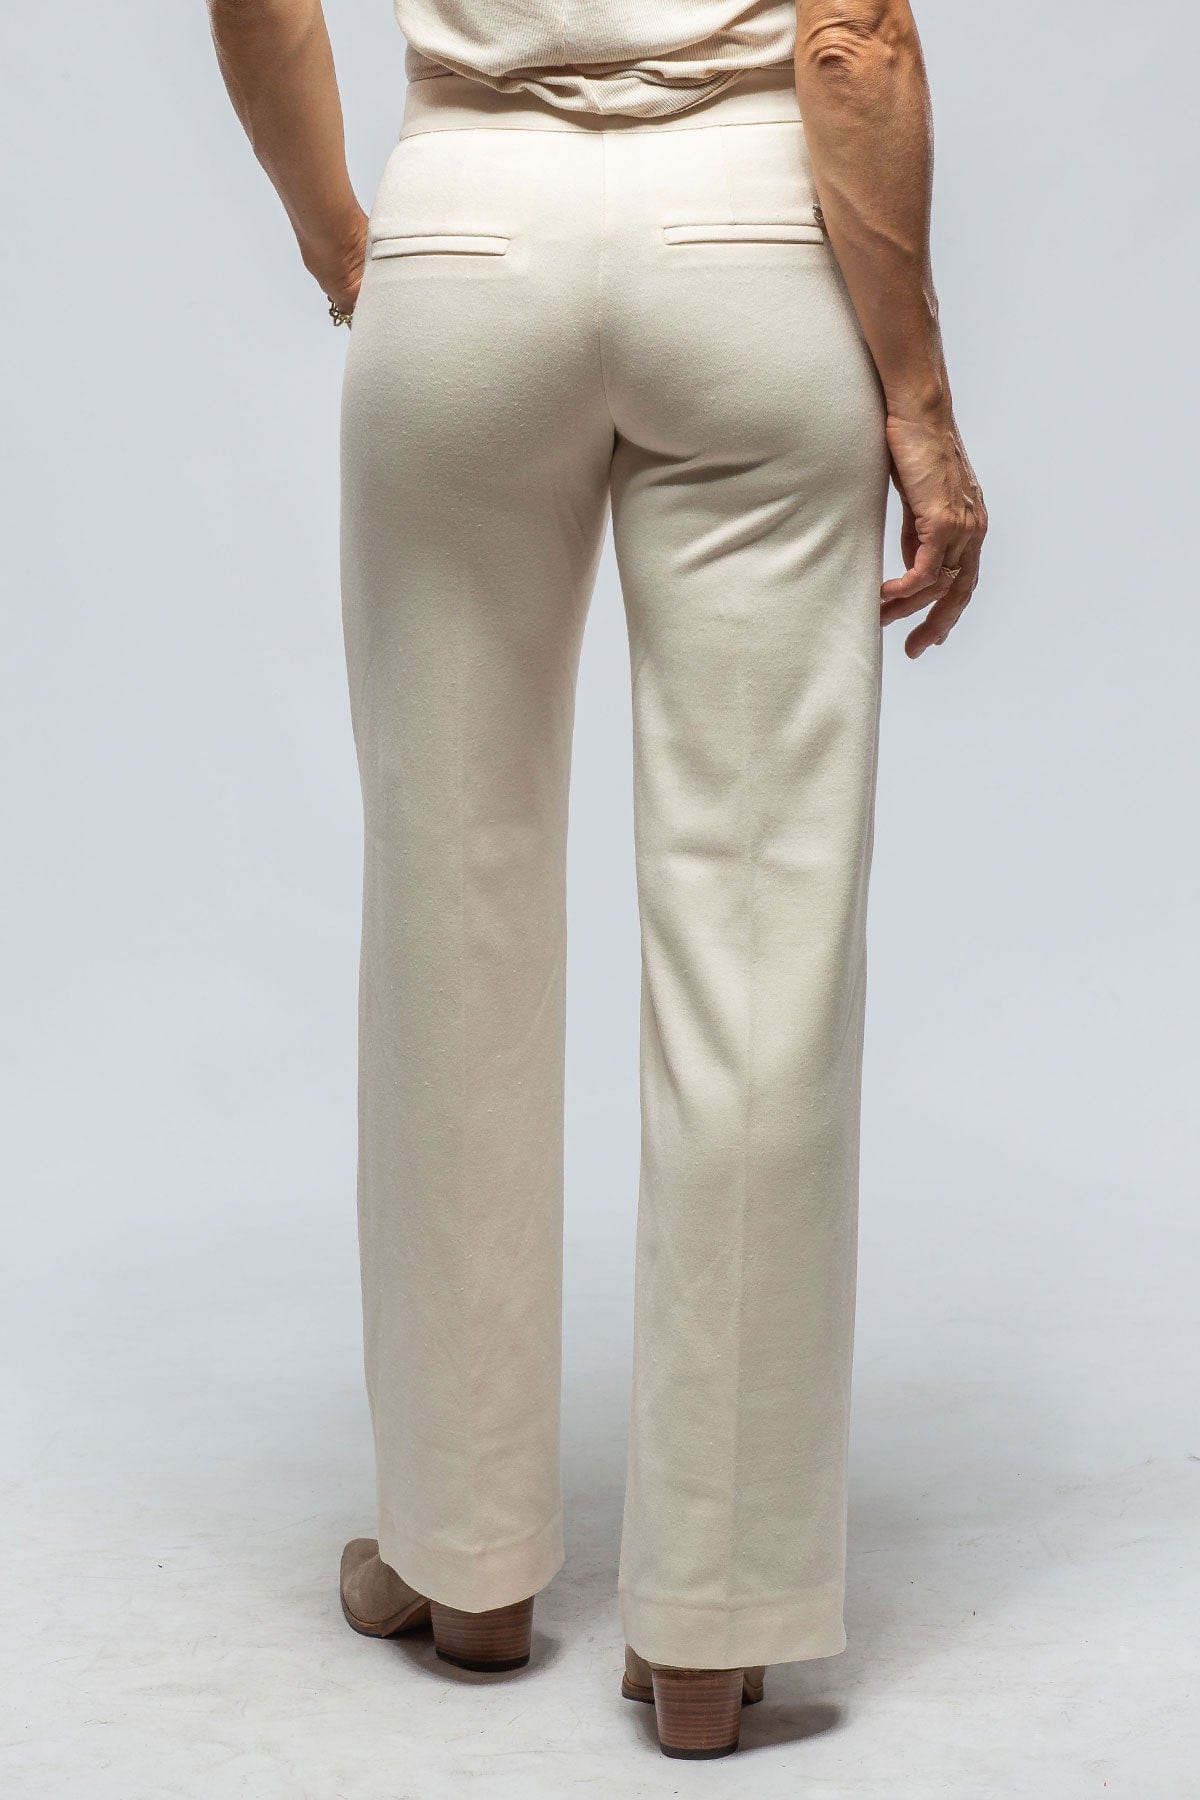 Vintage High Waisted Office Suit Pants For Women Elegant Slim Fit Straight  Formal Trousers For Ladies For Formal Business And Work From Mu01, $13.38 |  DHgate.Com